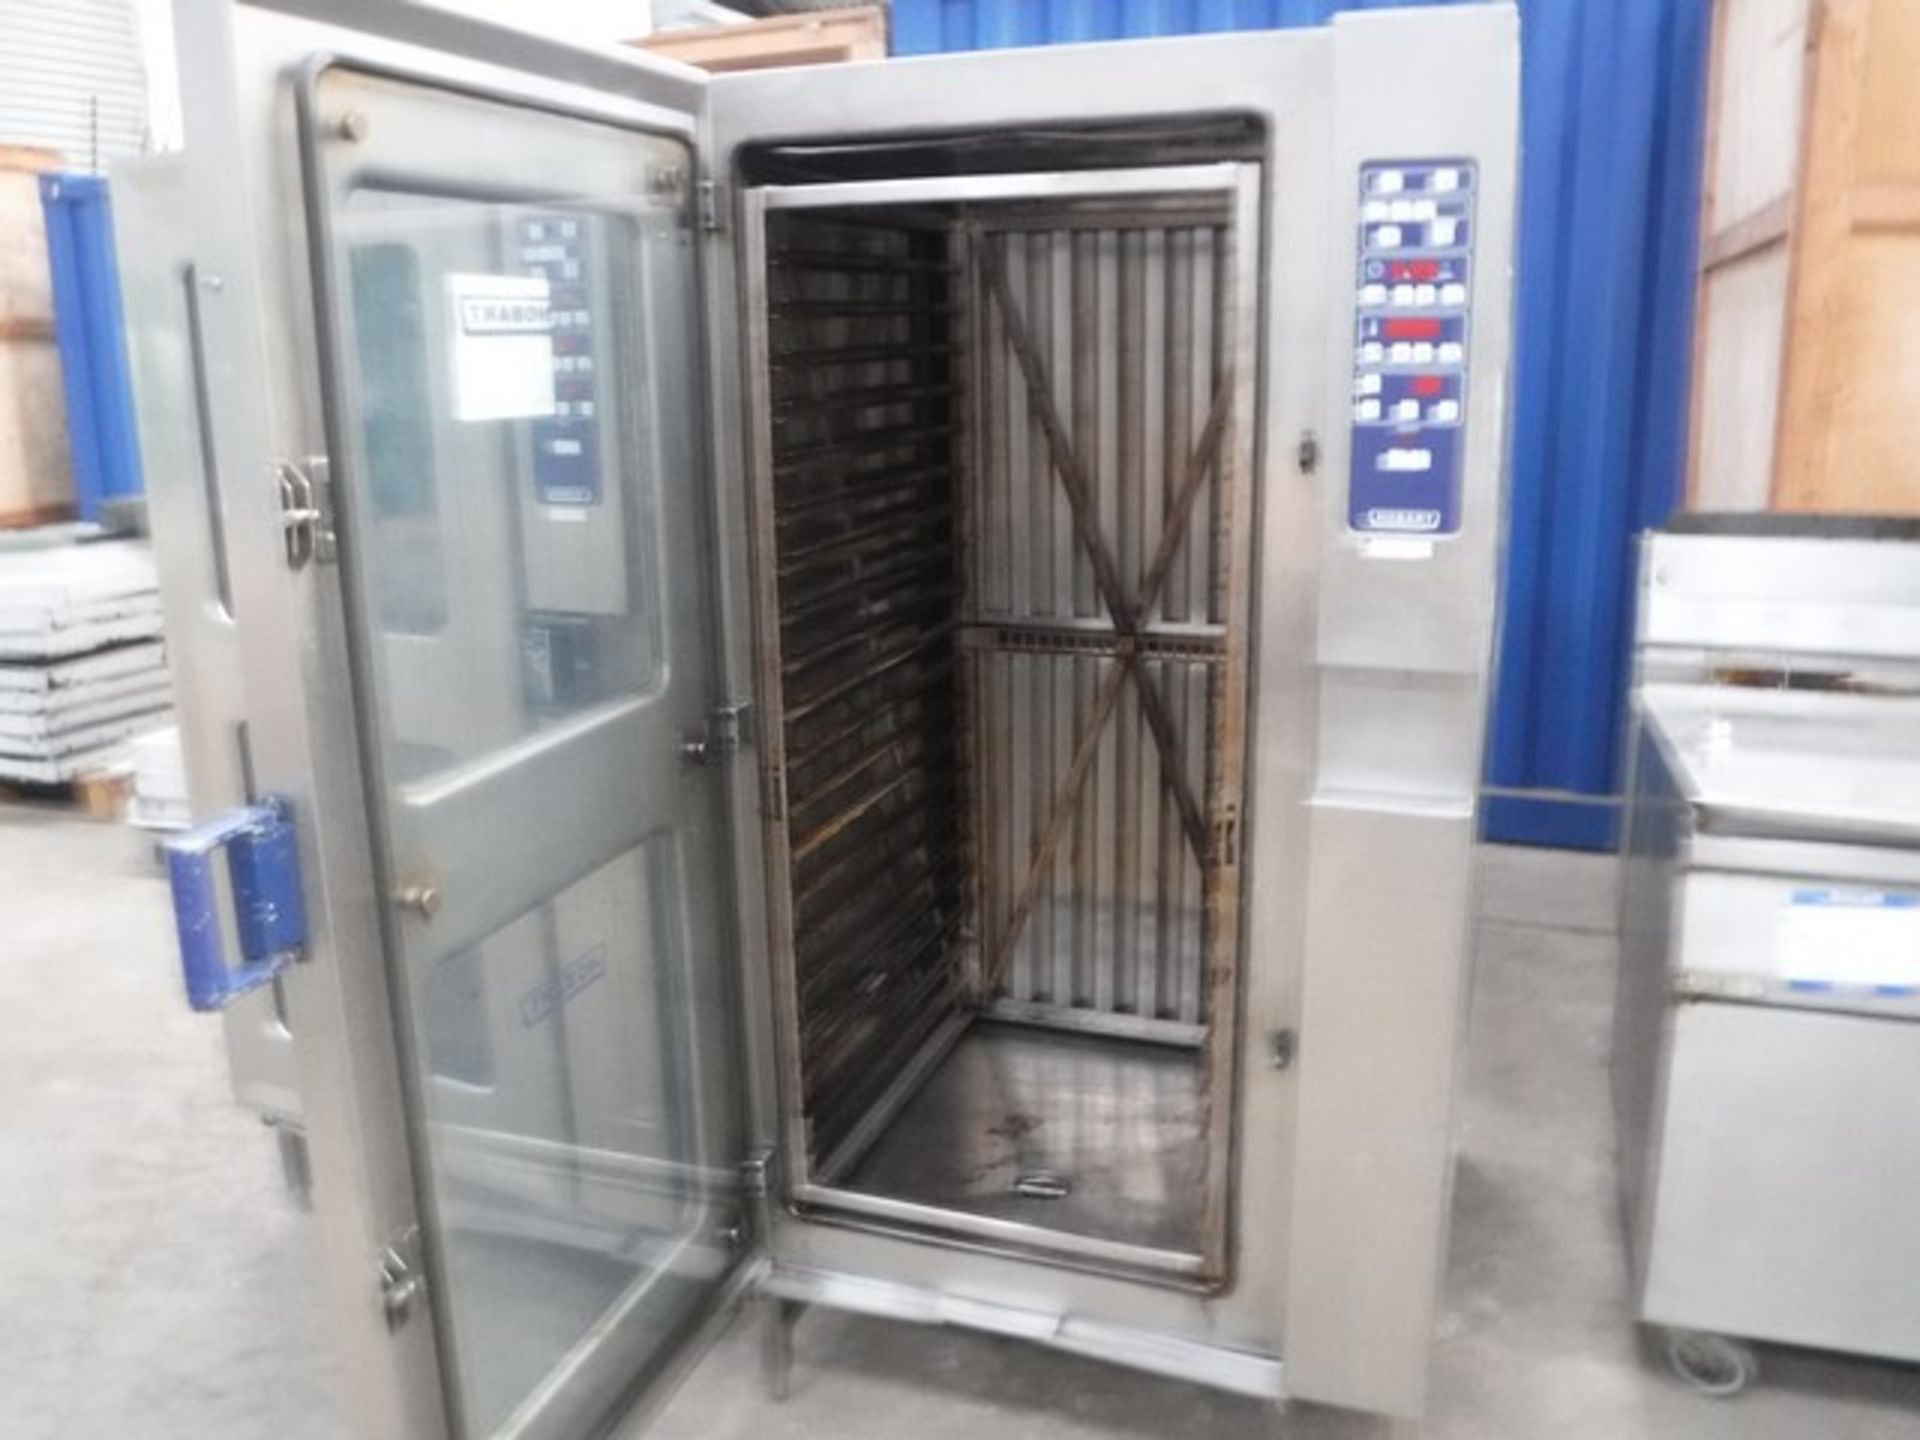 HOBART COMBI OVEN C/W TROLLY 3 PHASE - Image 2 of 3